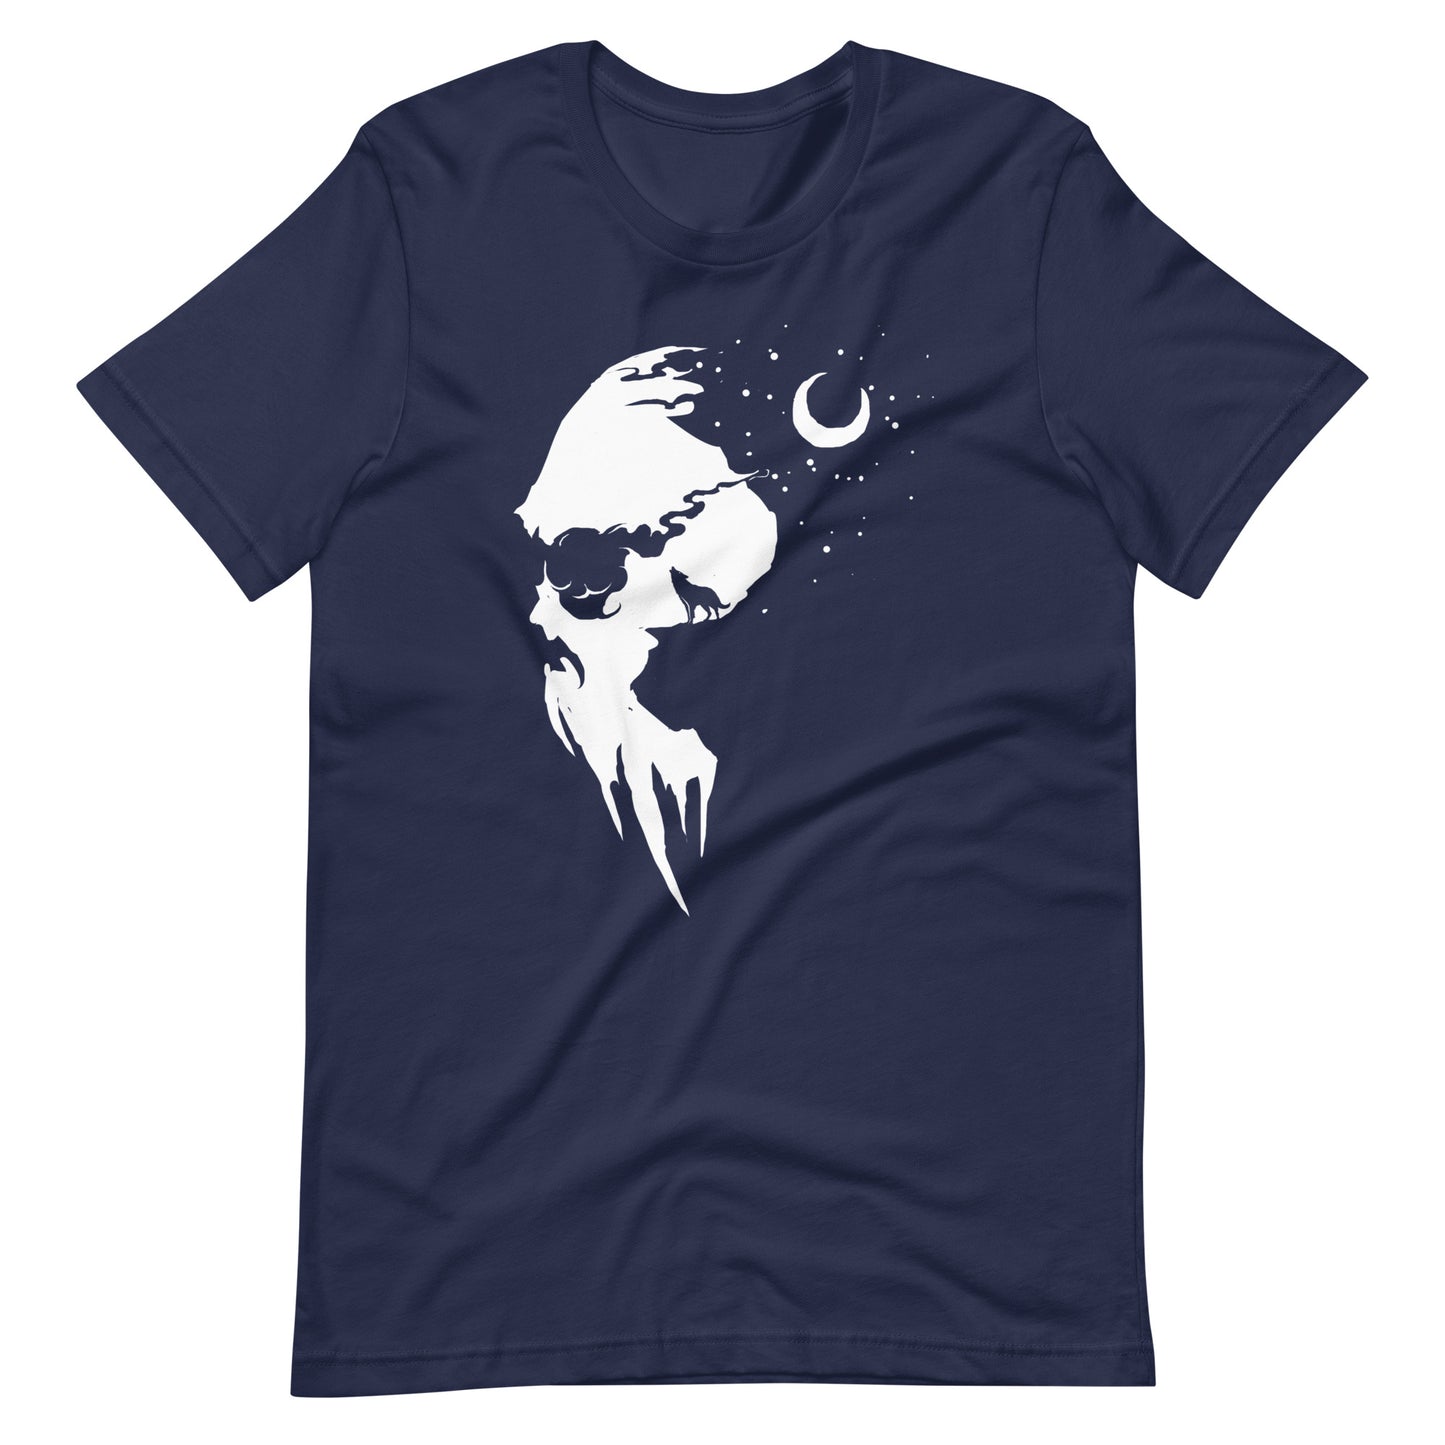 The Night Has Come - Men's t-shirt - Navy Front